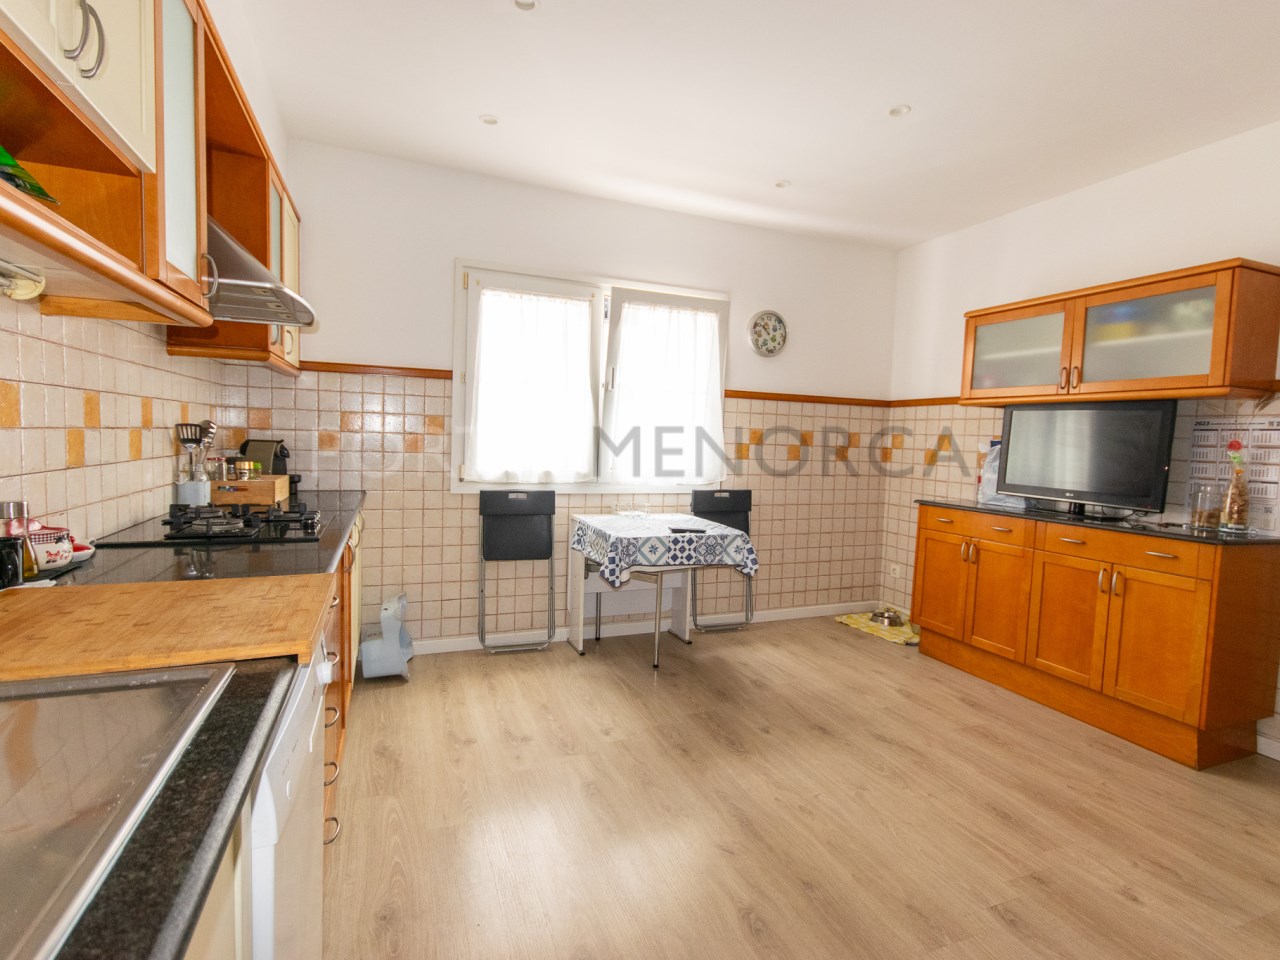 Duplex kitchen with large terrace in Mercadal